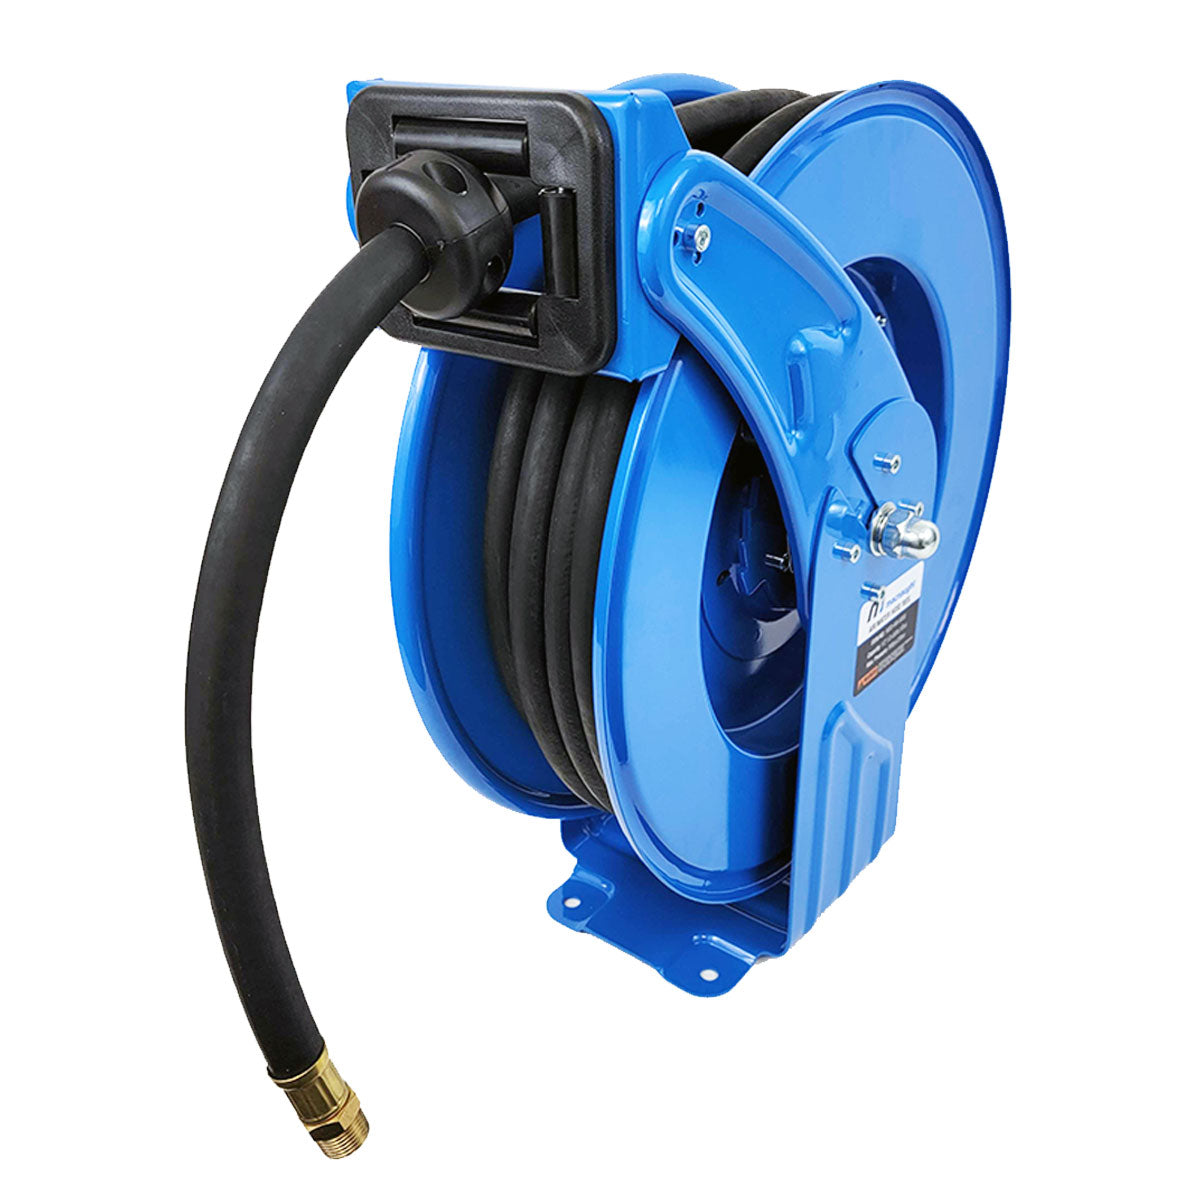 M3 Industrial Grade Air/Water Hose Reel Dual Pedestal Construction 300 PSI  Shop and Truck Mount Duty 1/2 Inch x 50 FT | M3D-AW-5050